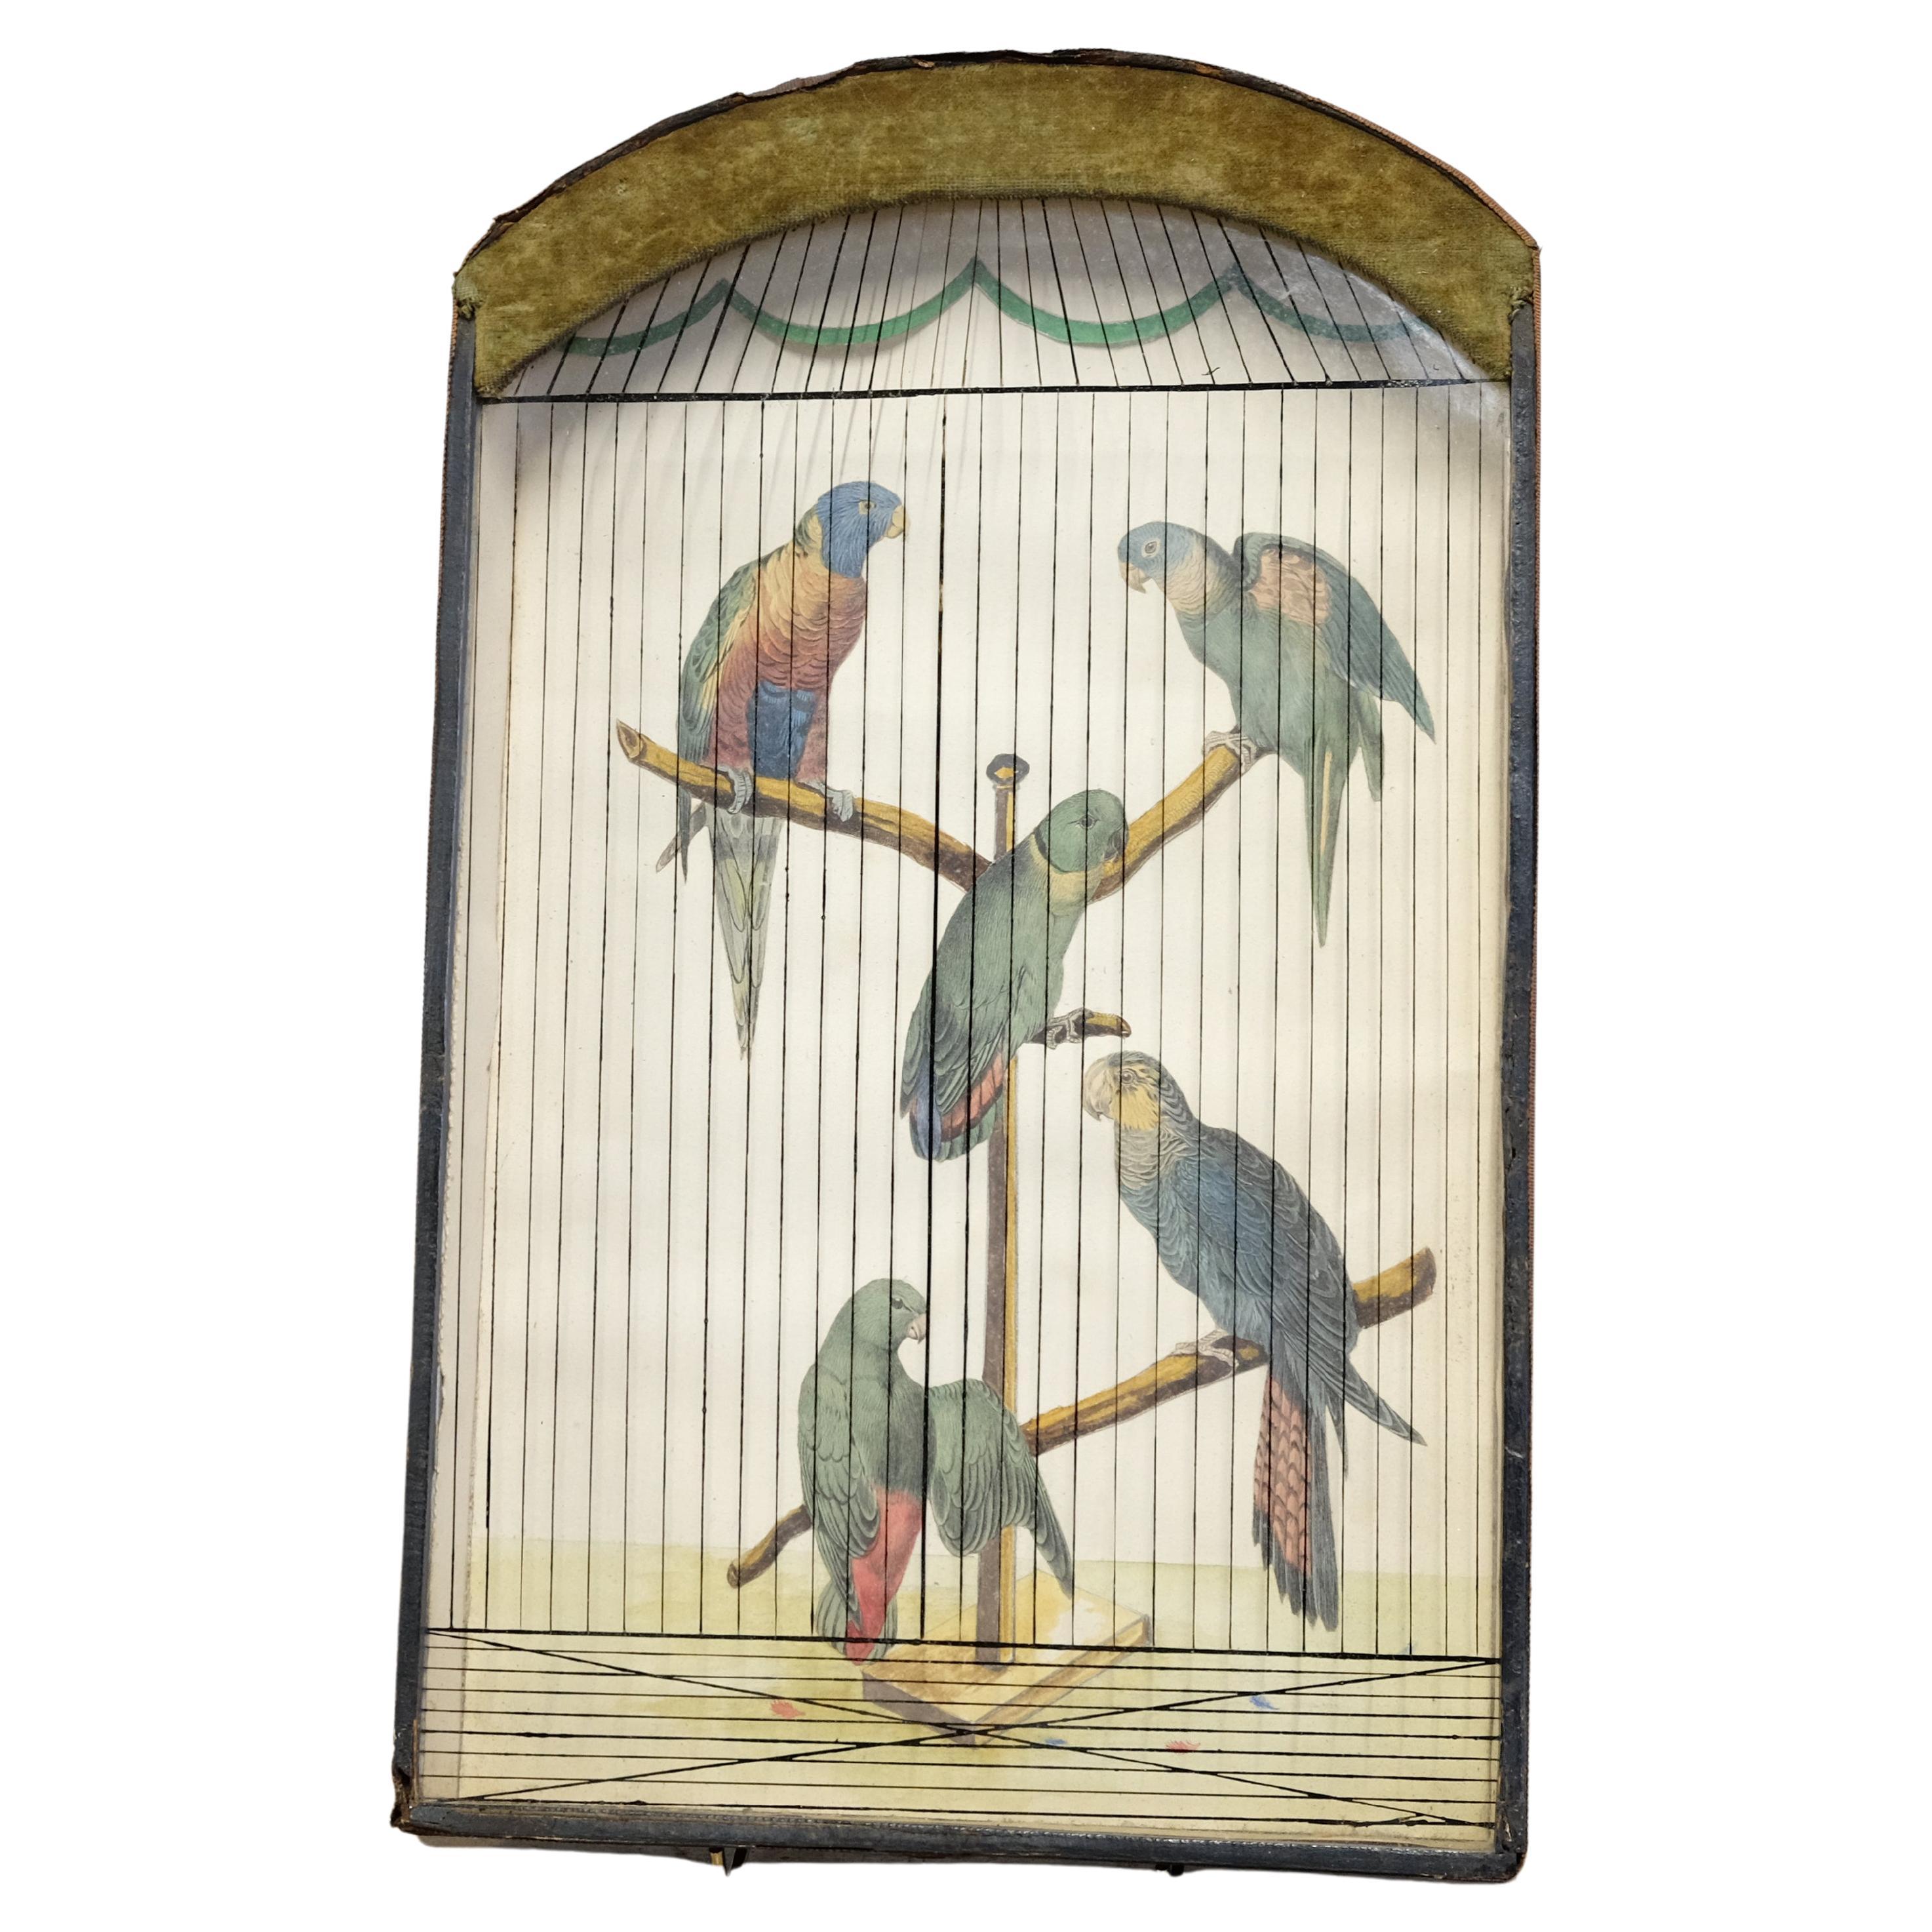 19th Century Trompe L'Oeil Parrot Cage, Hand Painted & Penwork, French, Original